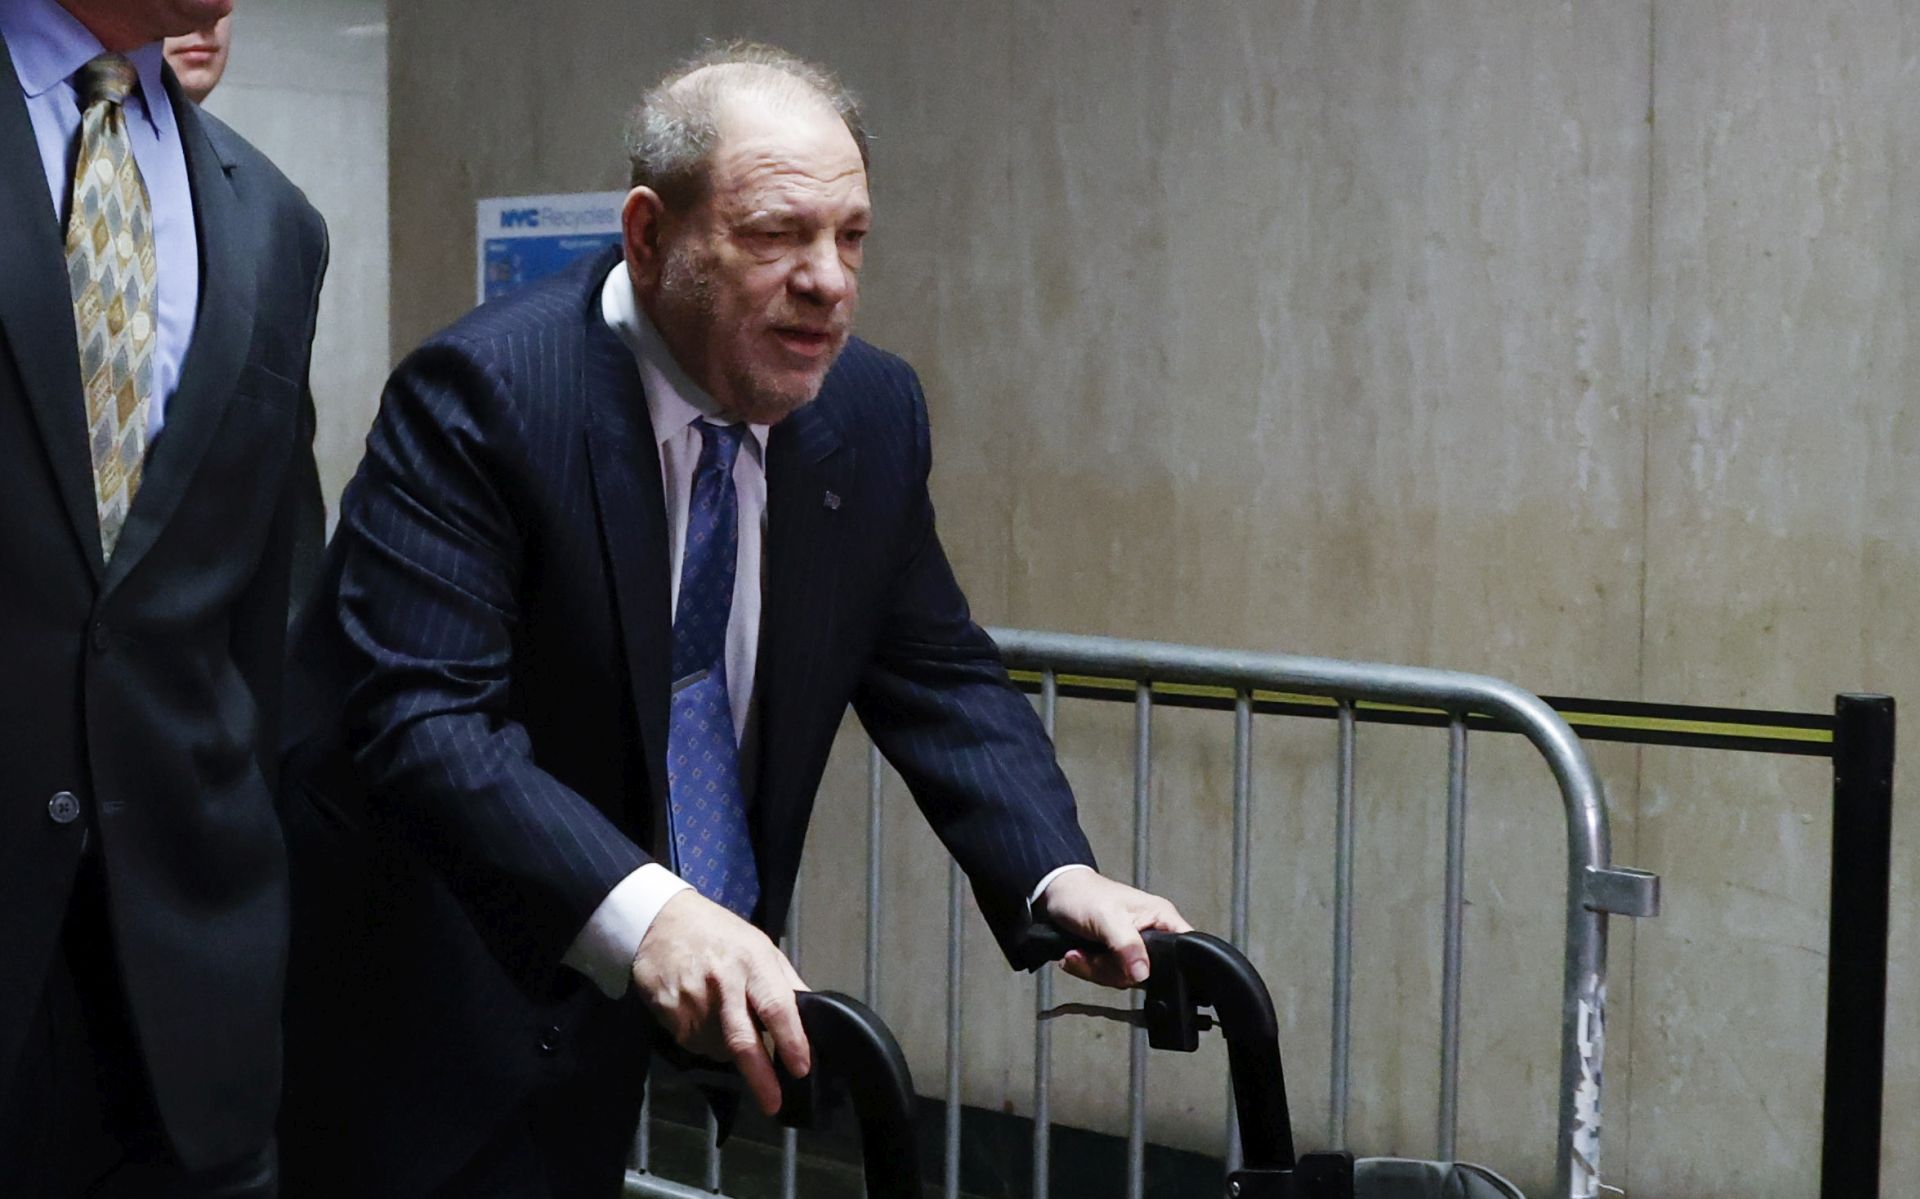 epa08197943 Former Hollywood producer Harvey Weinstein arrives to the court room with members of his legal team for another day of his sexual assault trial at New York State Supreme Court in New York, New York, USA,  06 February 2020.  EPA/JASON SZENES